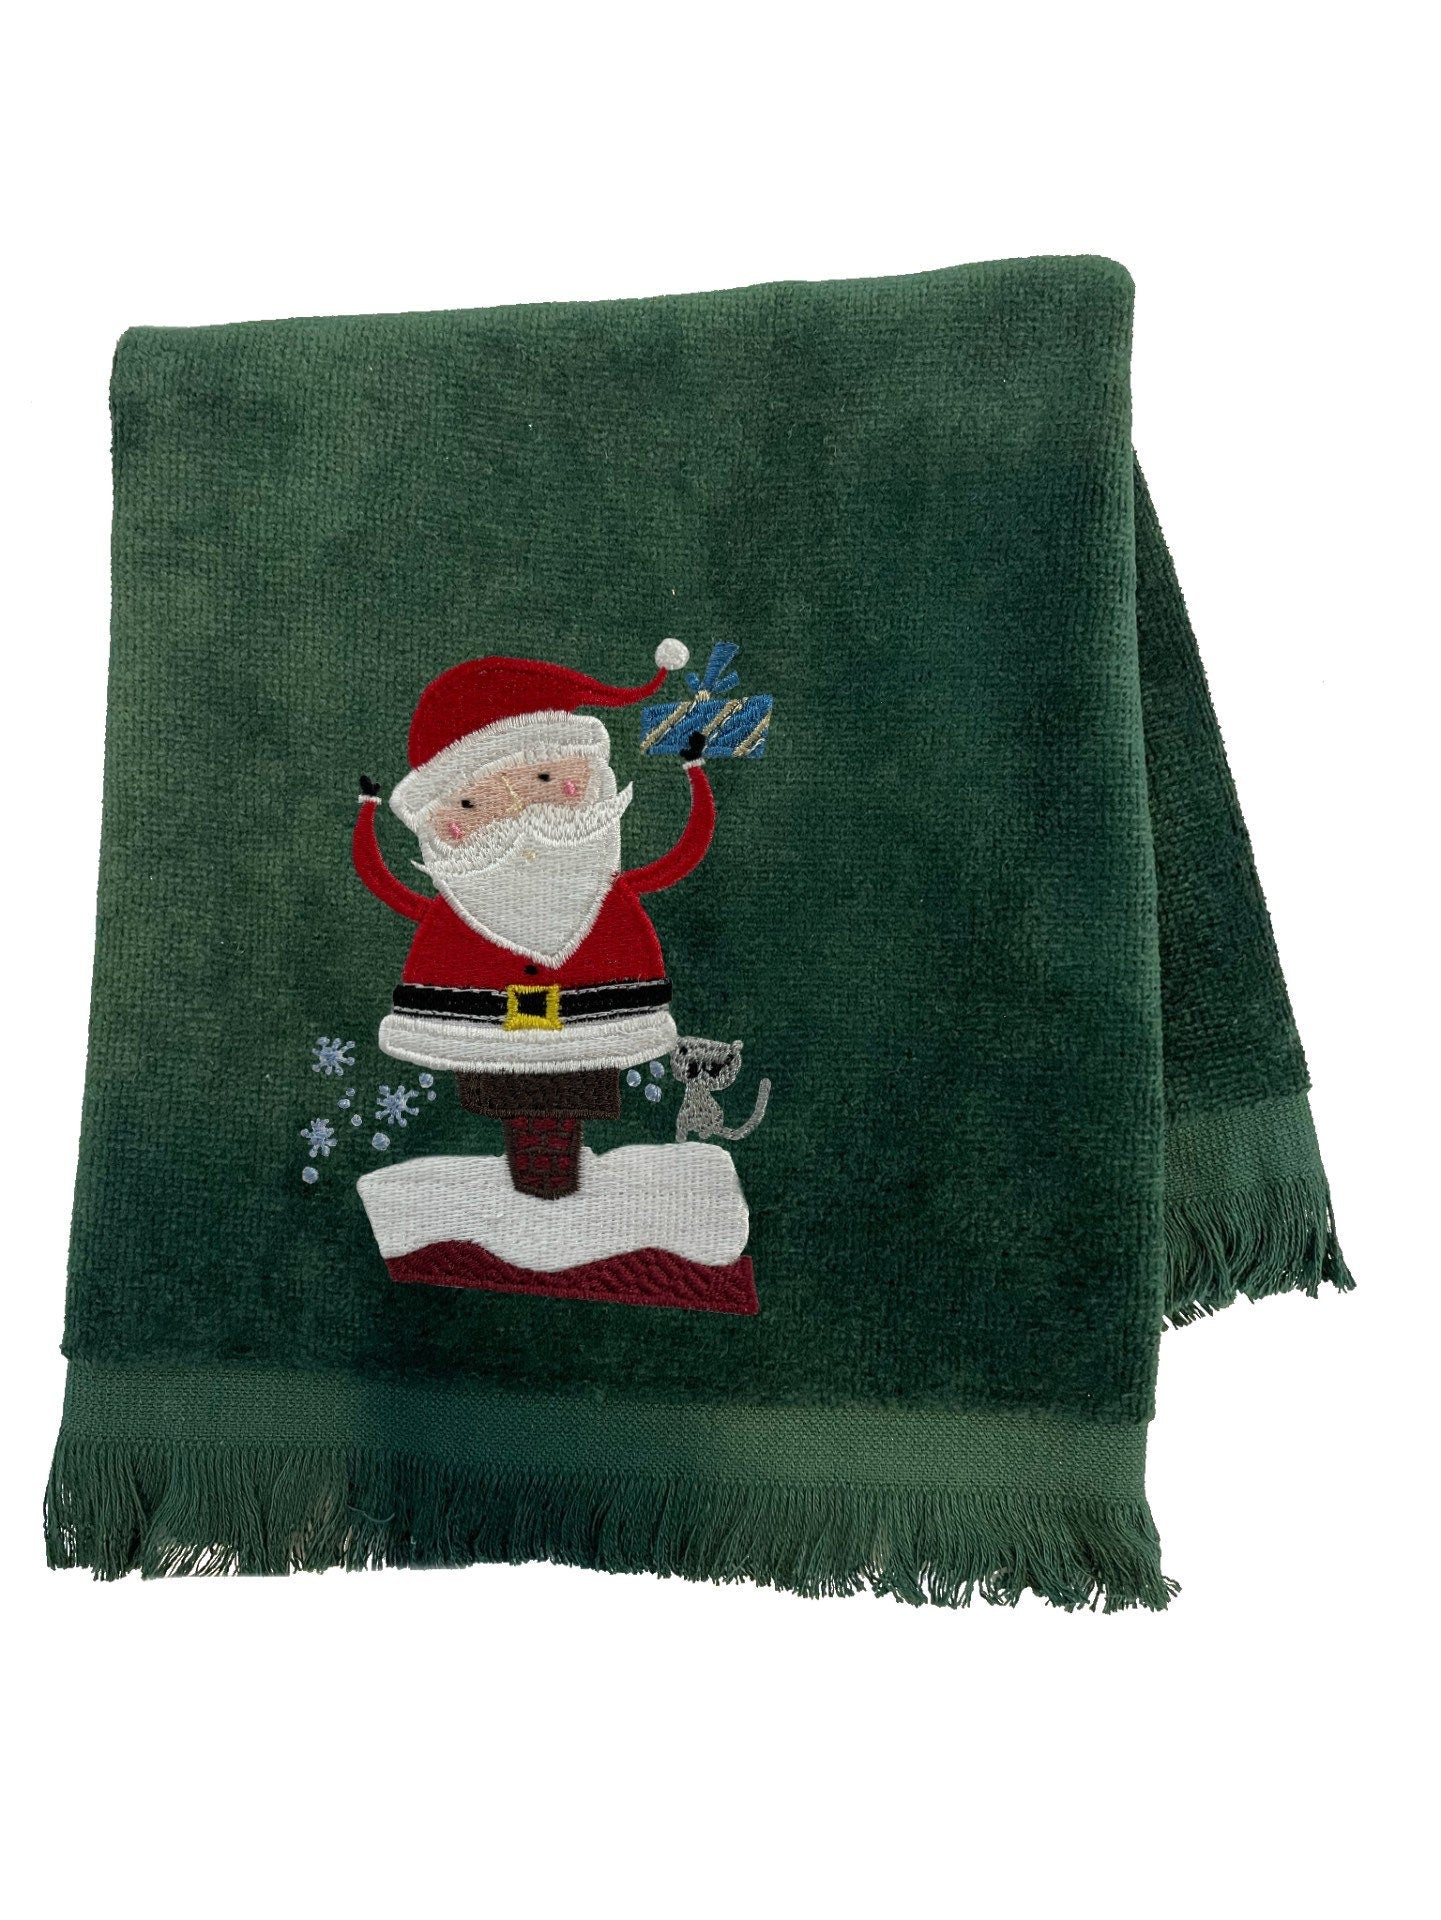 Embroidered Christmas Santa Bath Towels. 100% Cotton Hand or Fingertip Towel